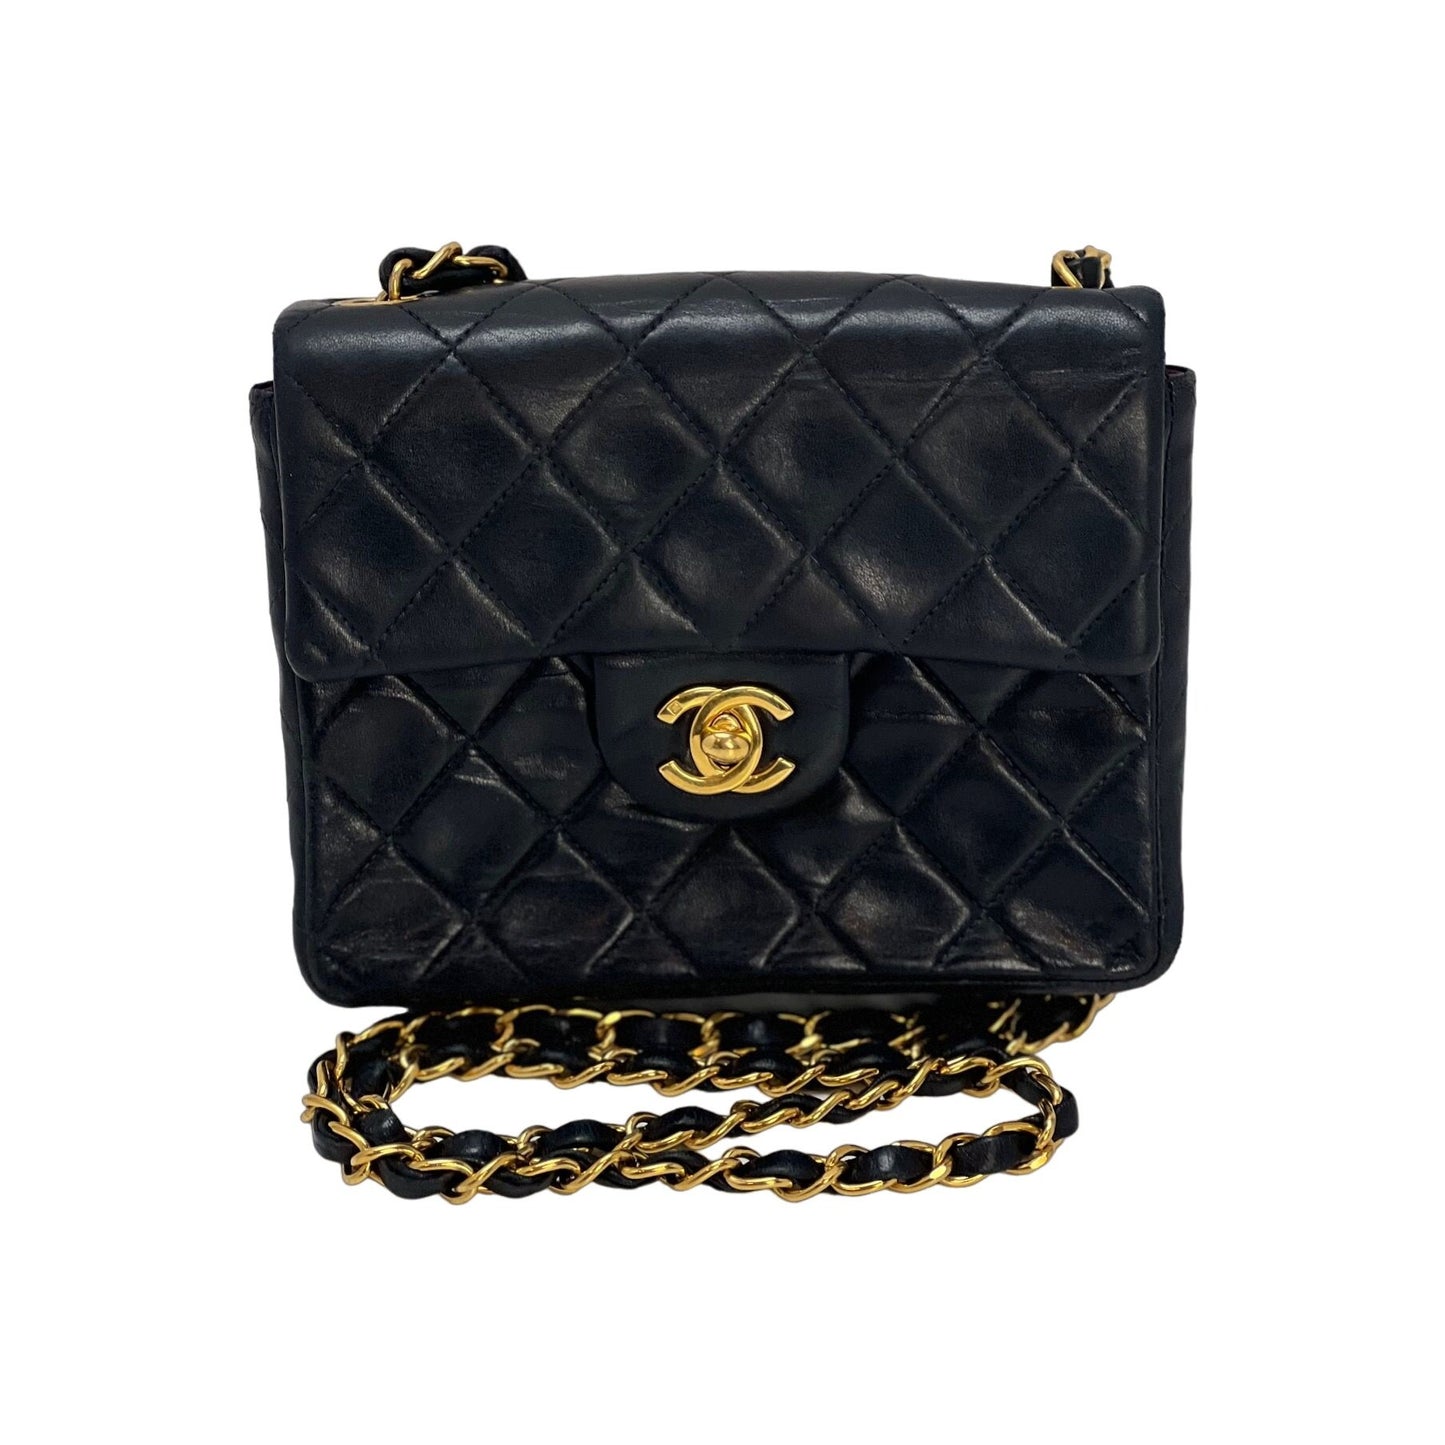 Chanel Lambskin Quilted Mini Square Flap Black Bag